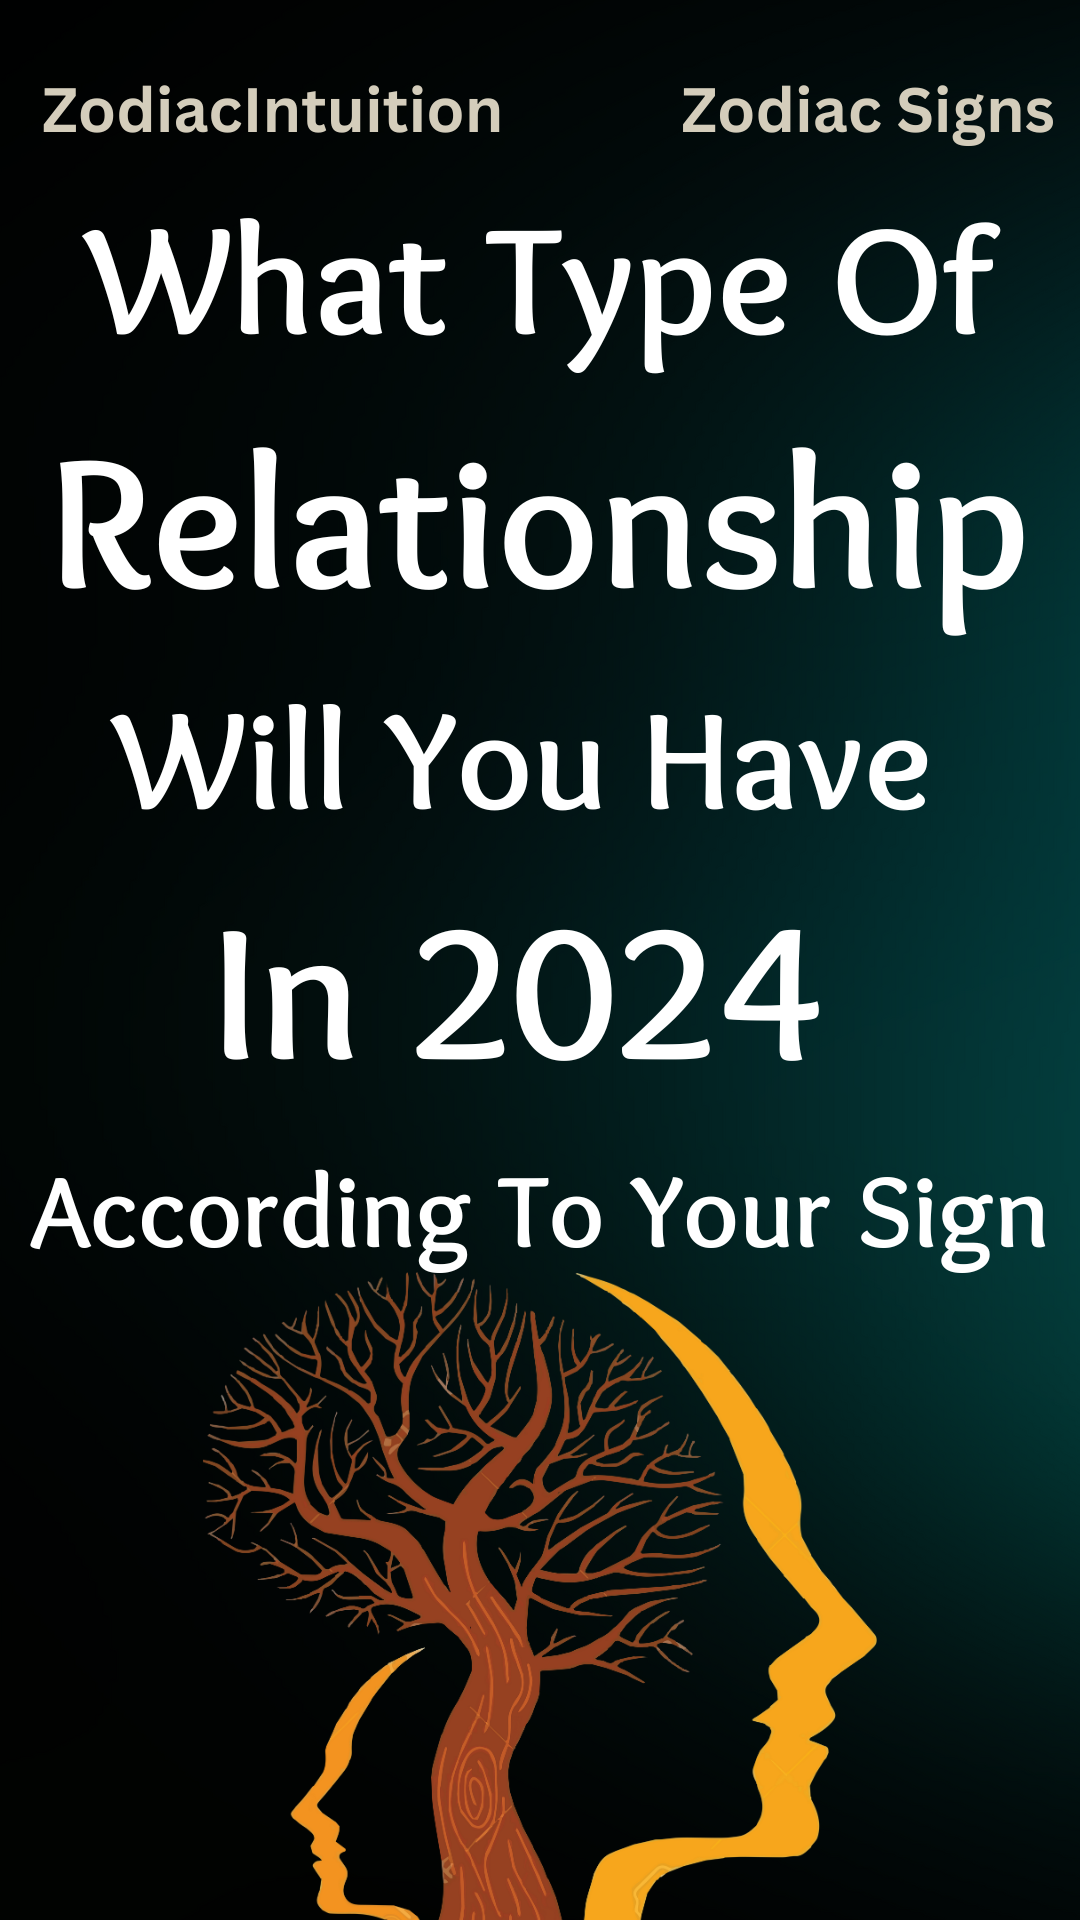 What Type Of Relationship Will You Have In 2024 According To Your Sign